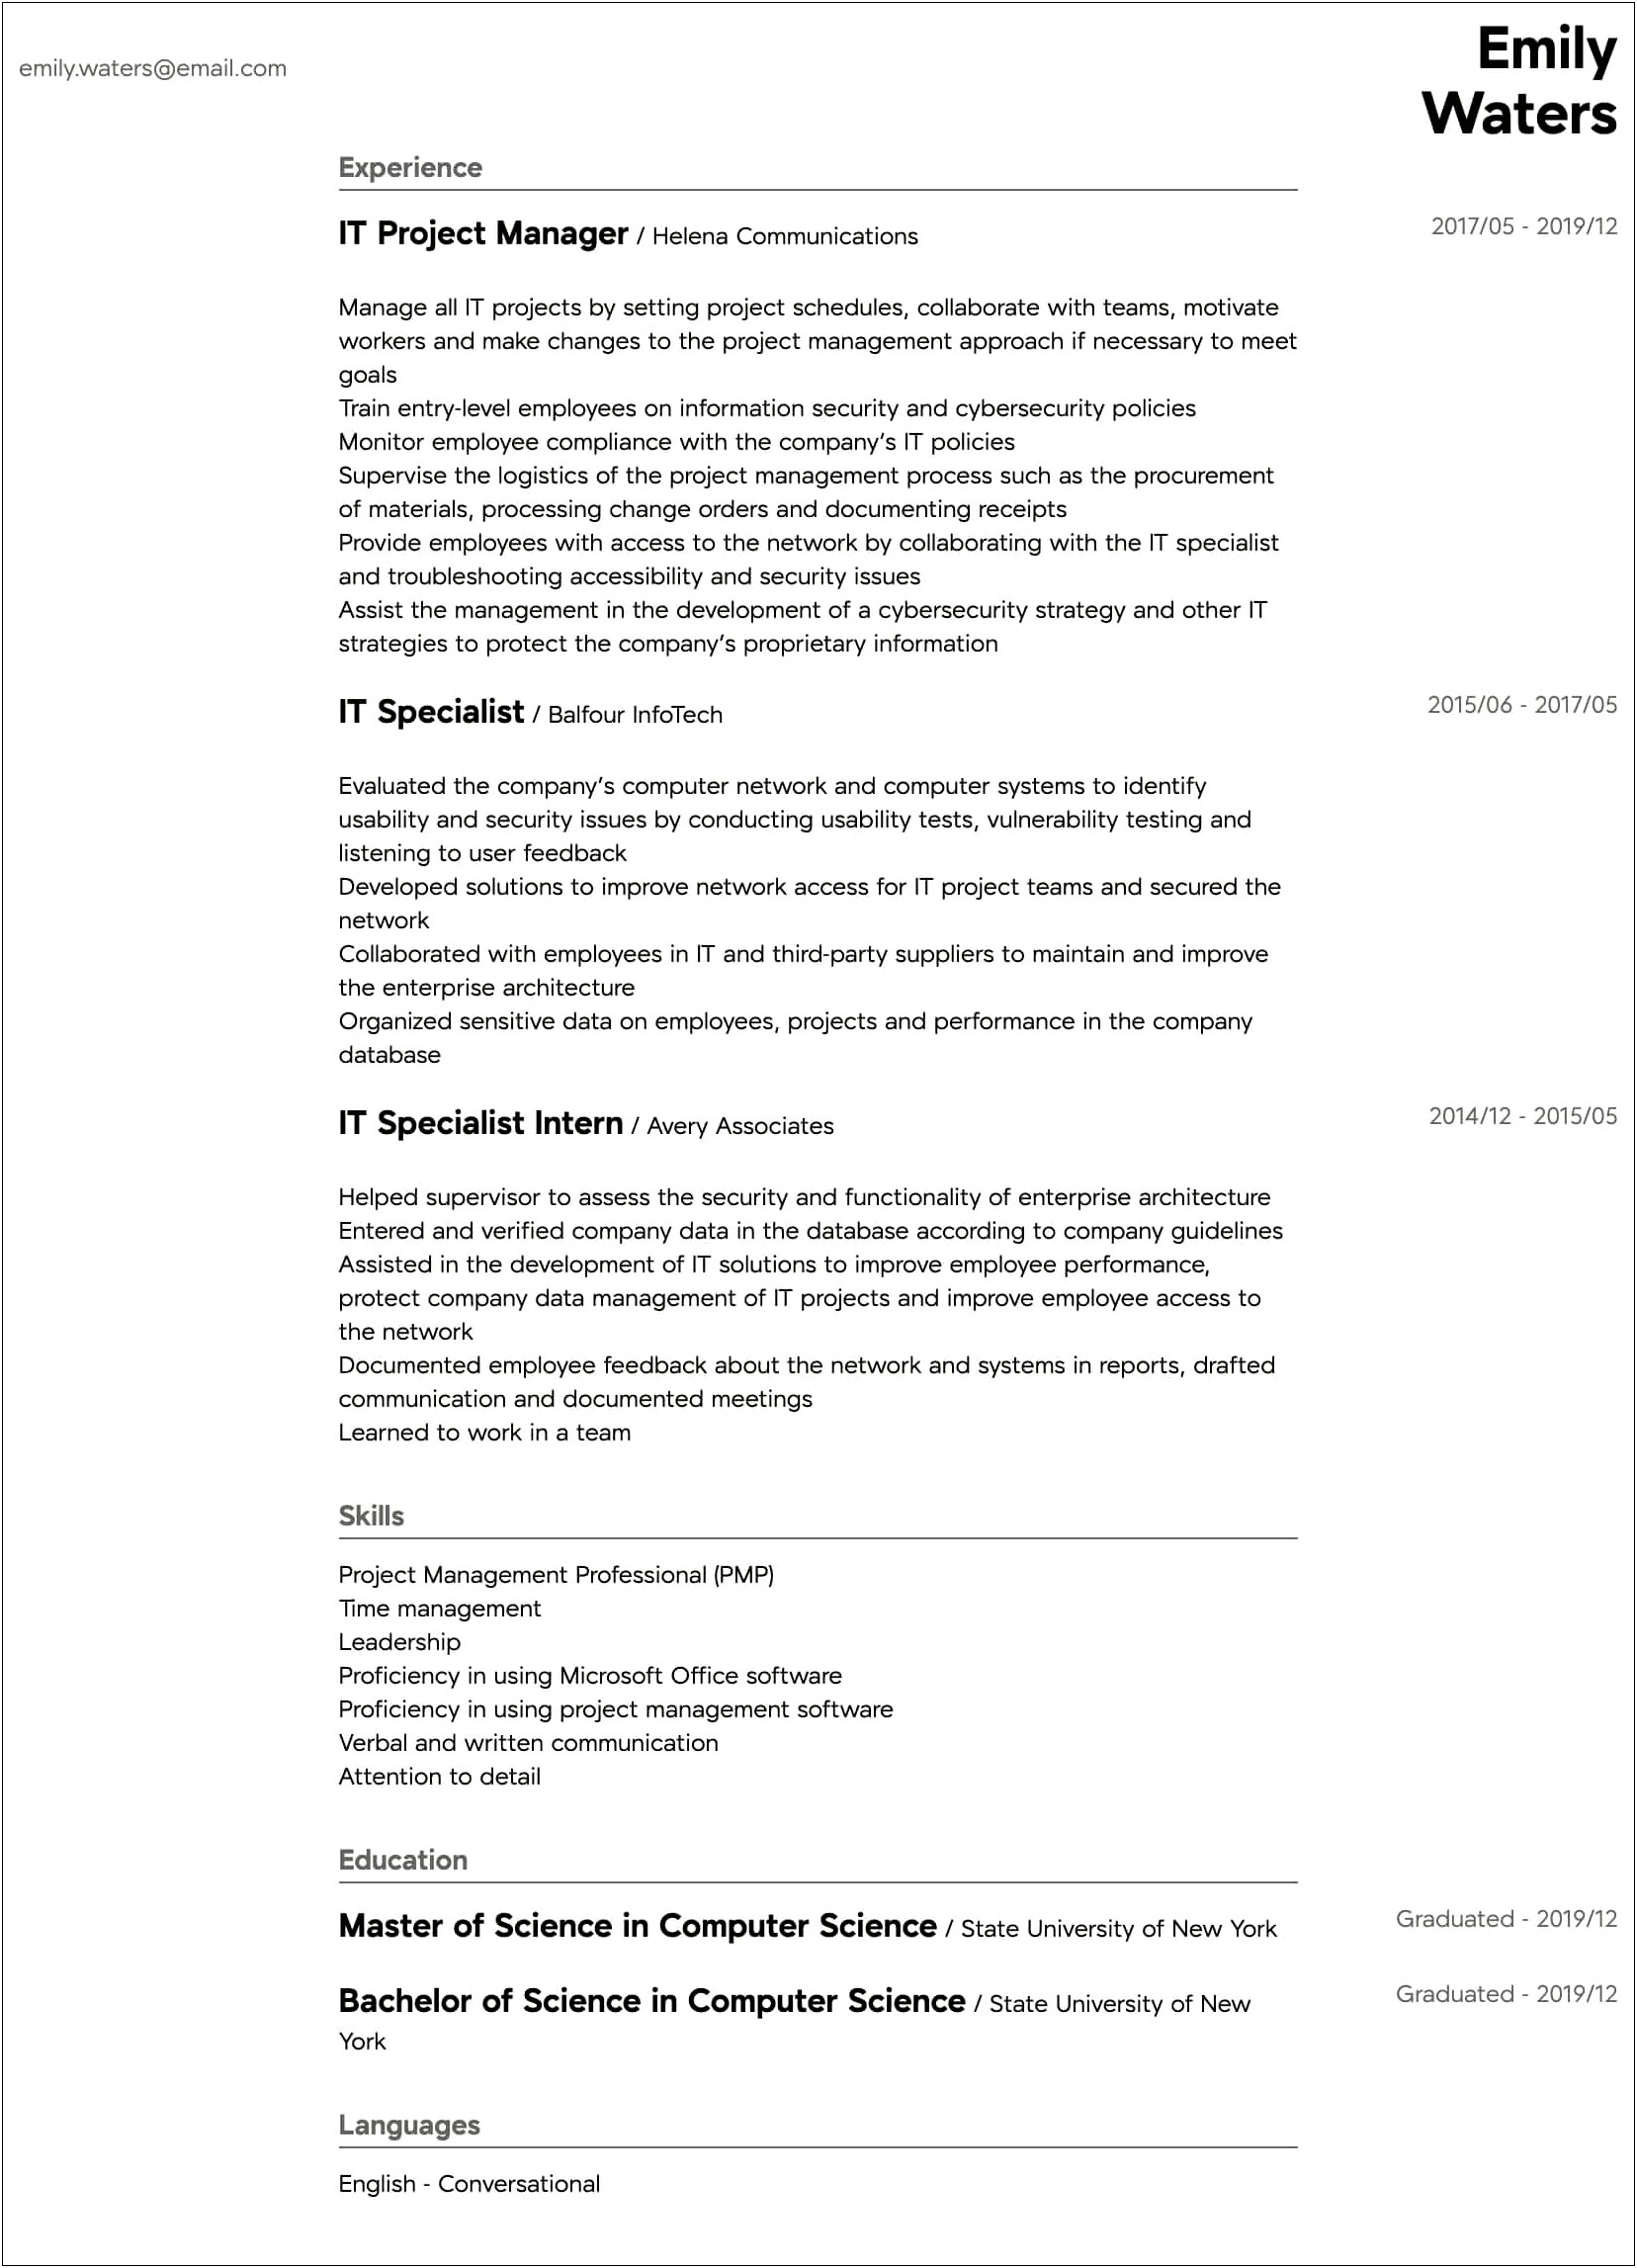 Sample Of A Resume Of A Project Manager